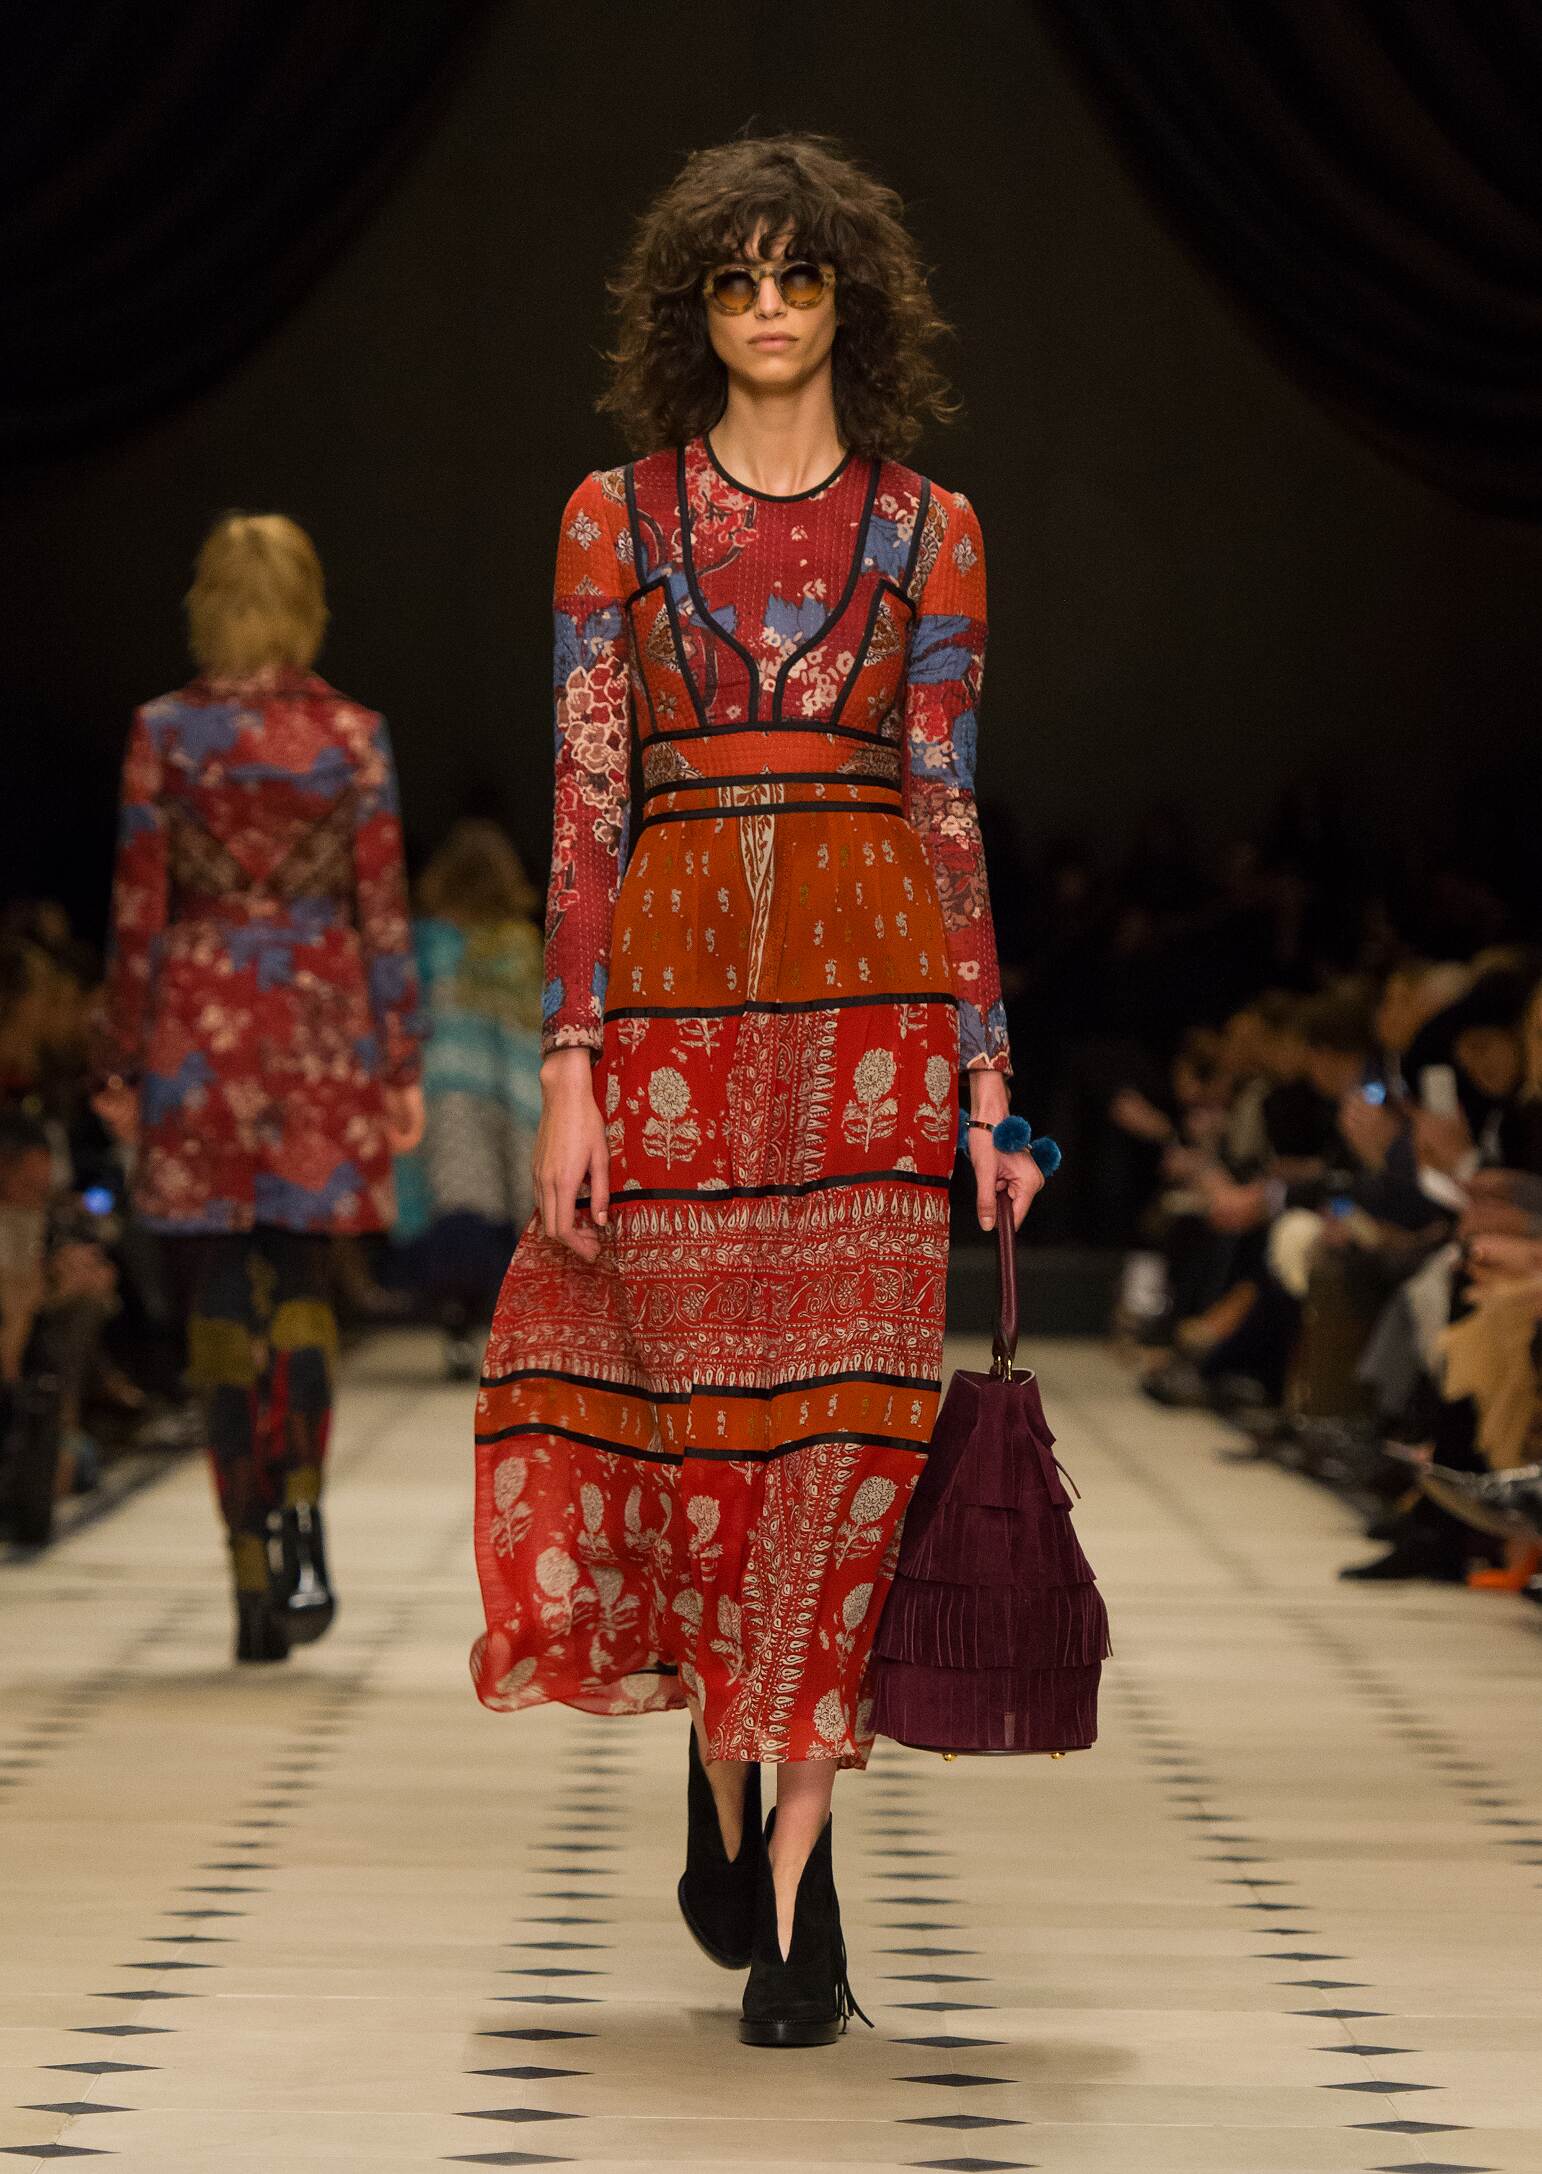 BURBERRY PRORSUM FALL WINTER 2015-16 WOMEN'S COLLECTION | The Skinny Beep